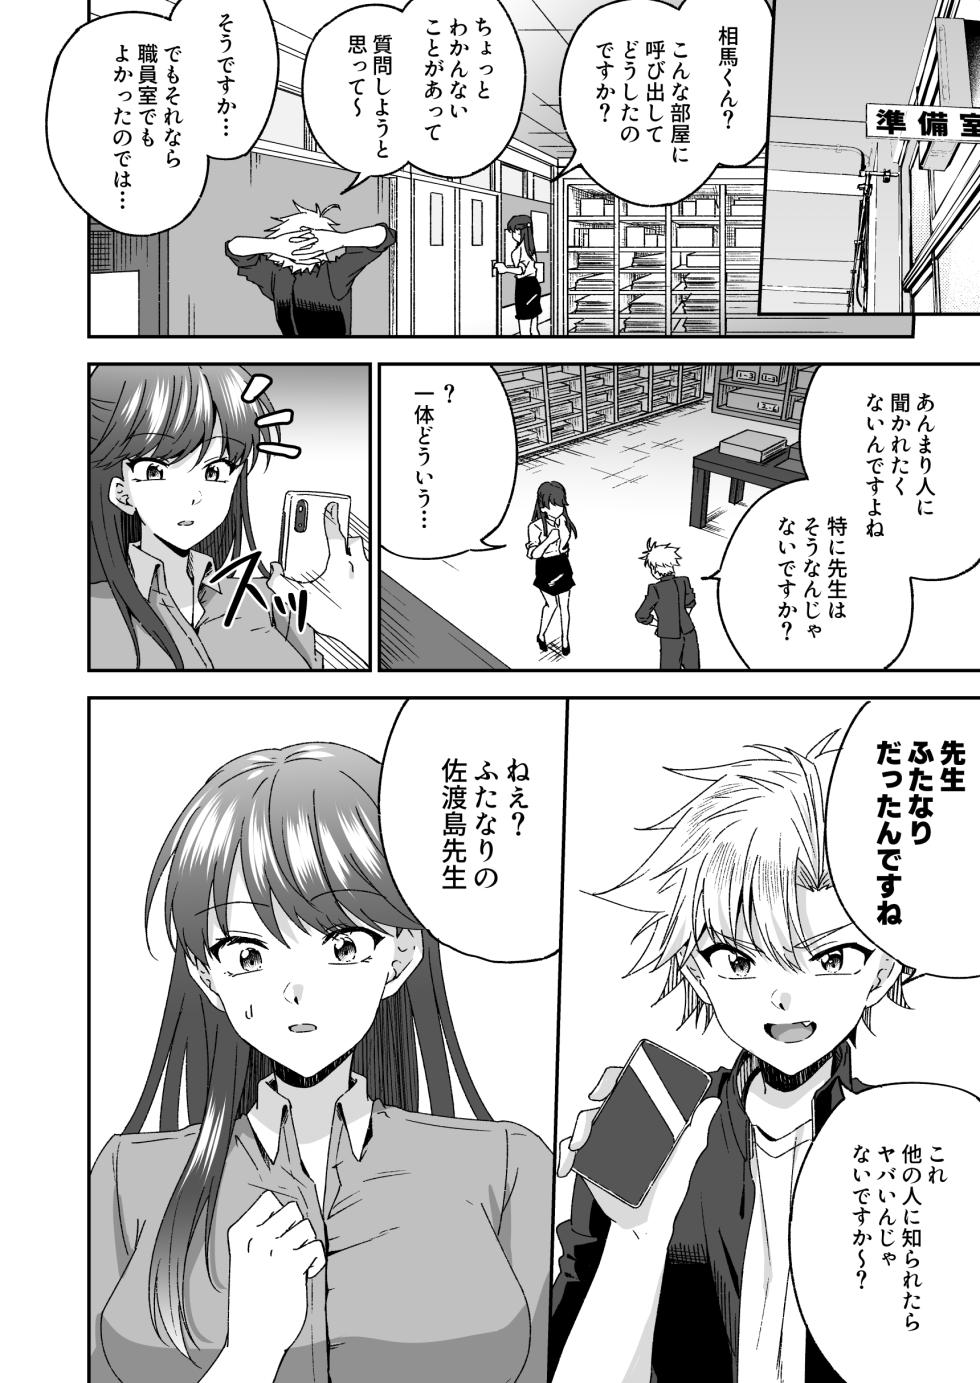 [Manga] A story about a delinquent boy who gets chastity belt ejaculation control reverse anal sex by a female teacher who is a nymphomaniac - Page 15